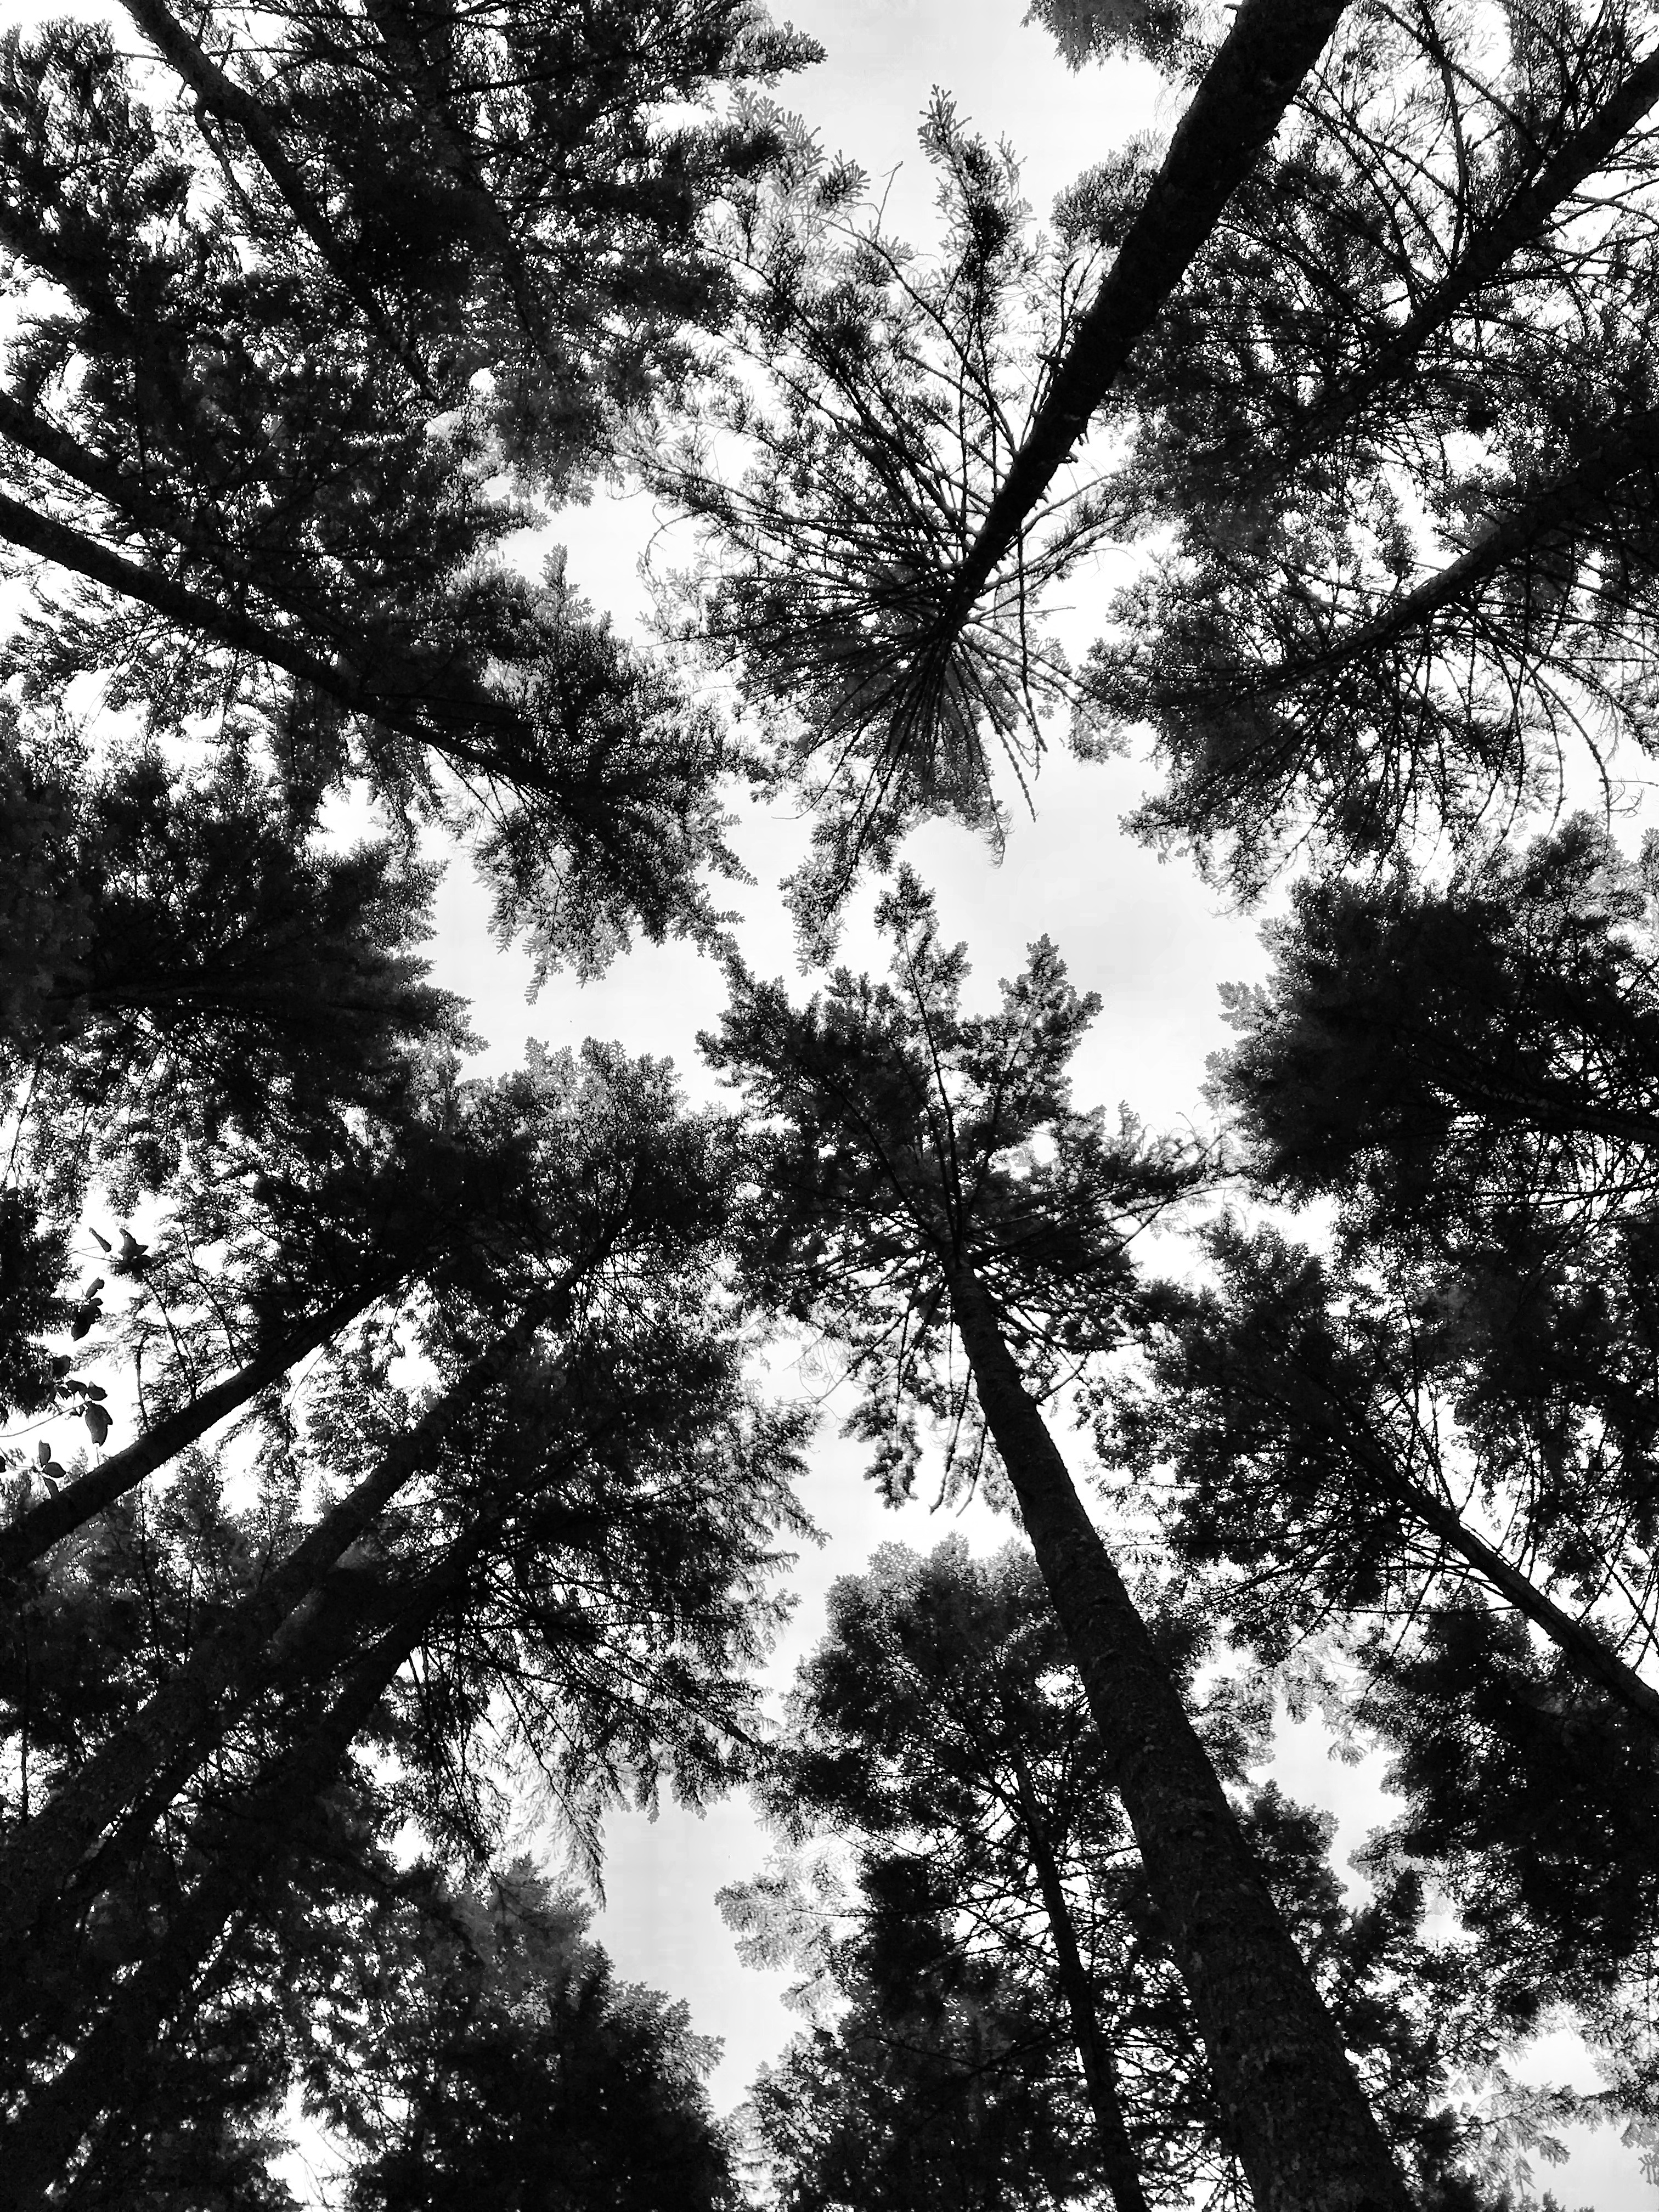 chb, tops, nature, trees, top, forest, crown, bw, view, crowns, dizzy, giddy High Definition image